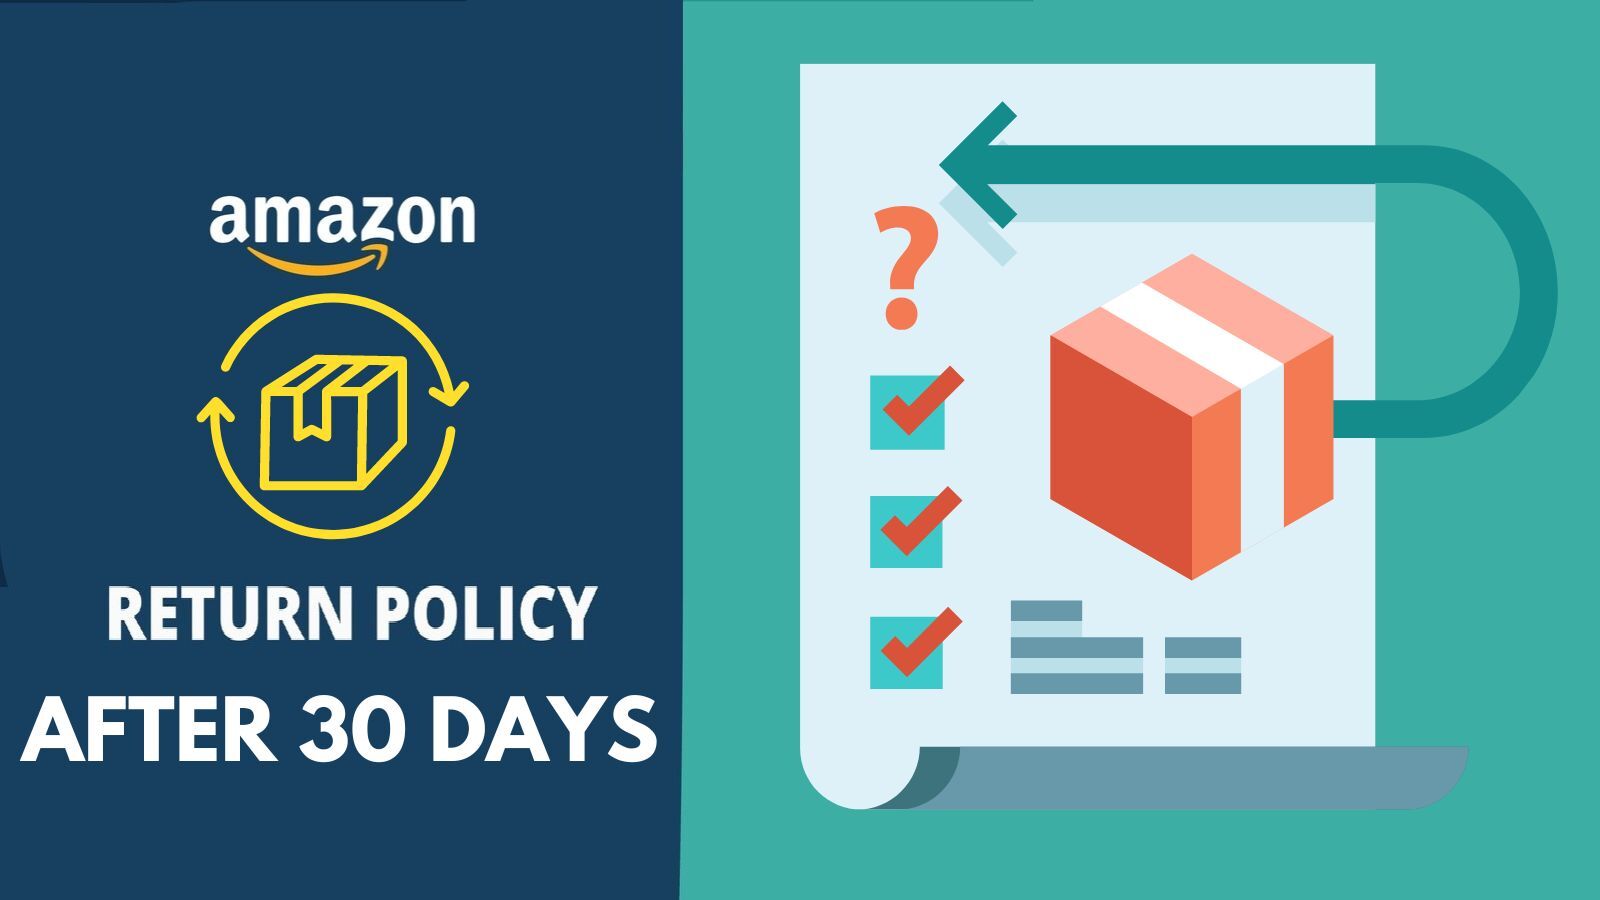 Amazon Return Policy After 30 Days (Steps, Timeframe, Refunds + More)